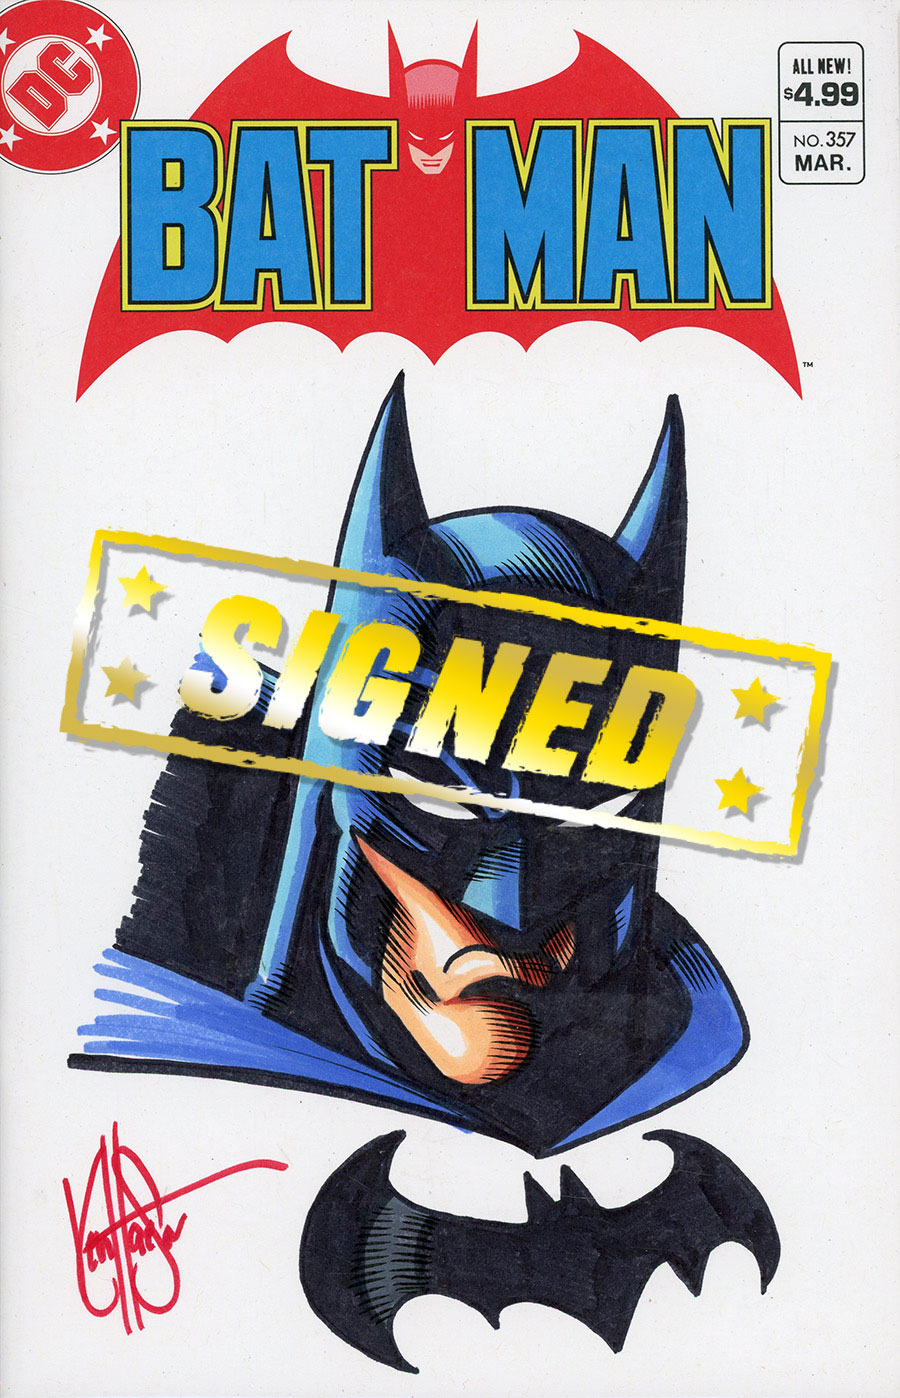 Batman #357 Facsimile Edition Cover E DF Blank Commissioned Cover Art Signed & Remarked By Ken Haeser With A Batman Hand-Drawn Sketch